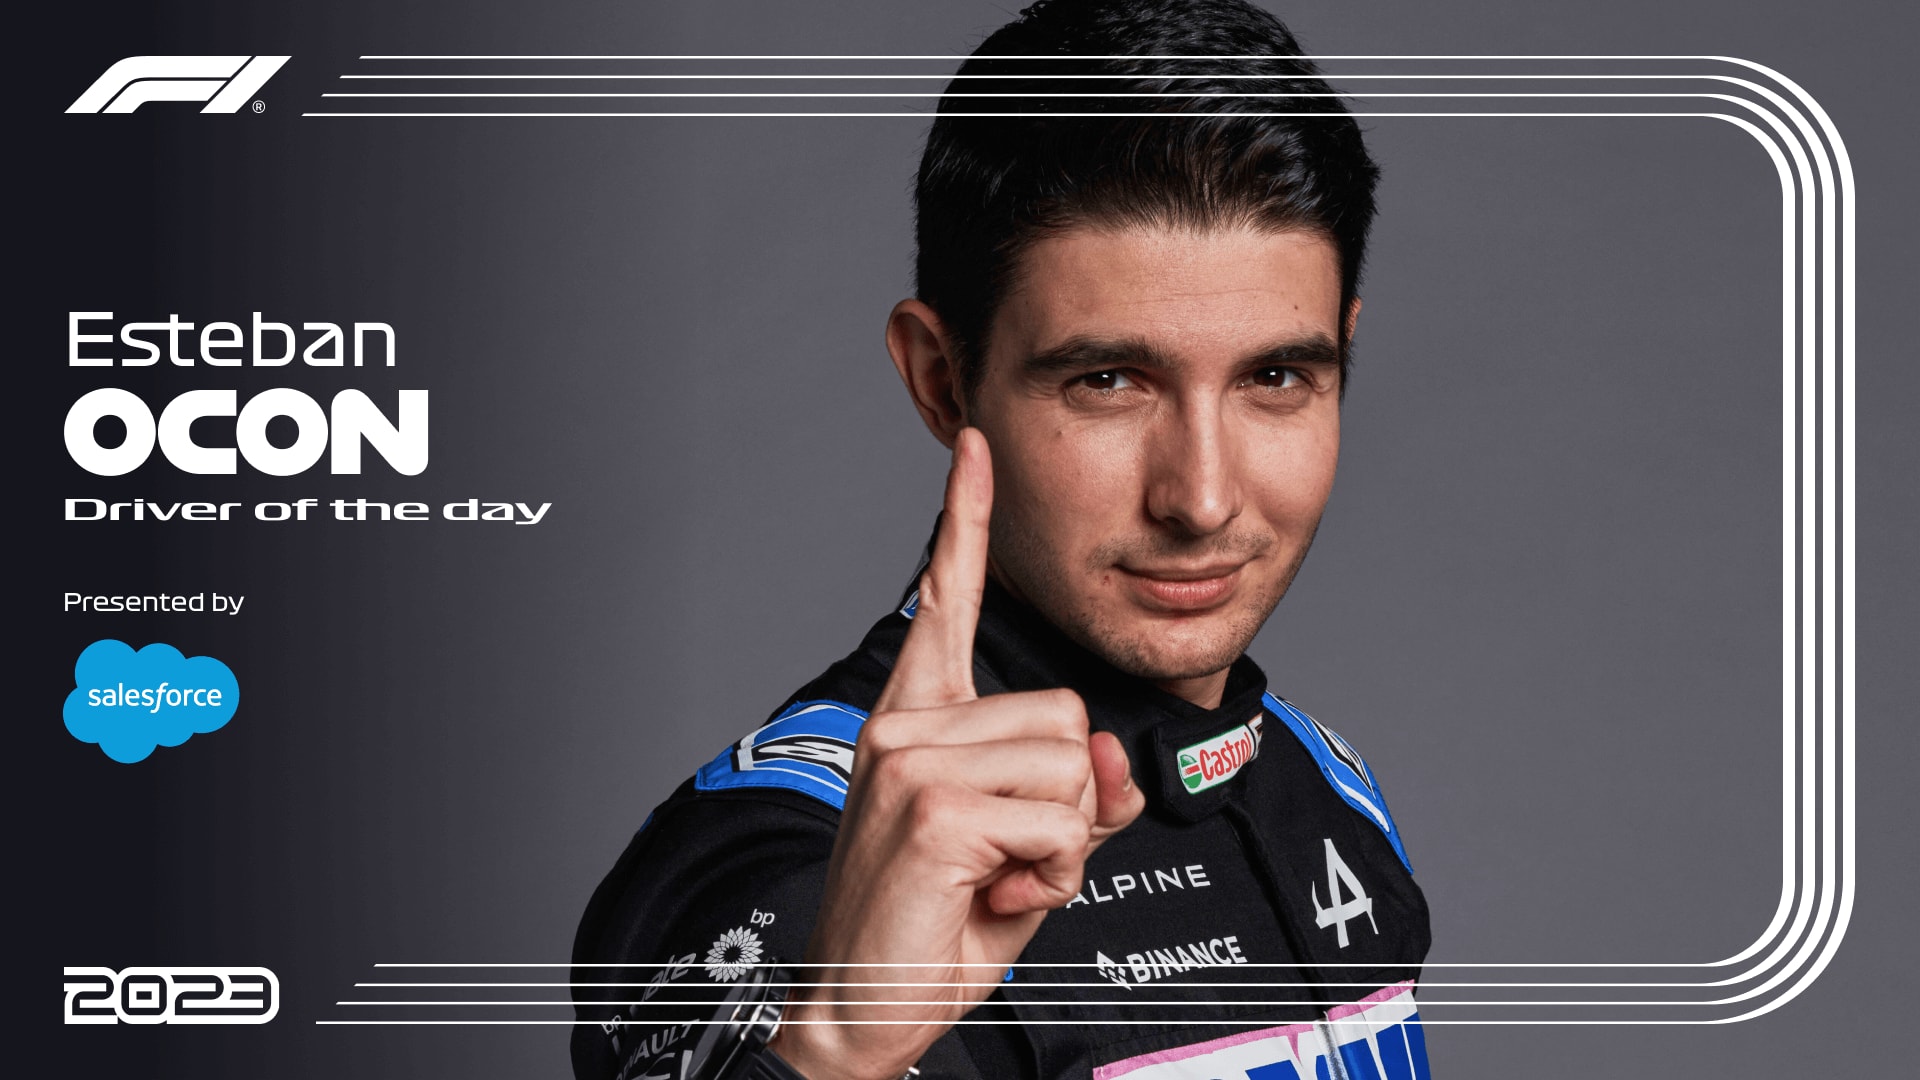 DRIVER OF THE DAY: Ocon gets your vote for mighty drive to P3 in Monaco